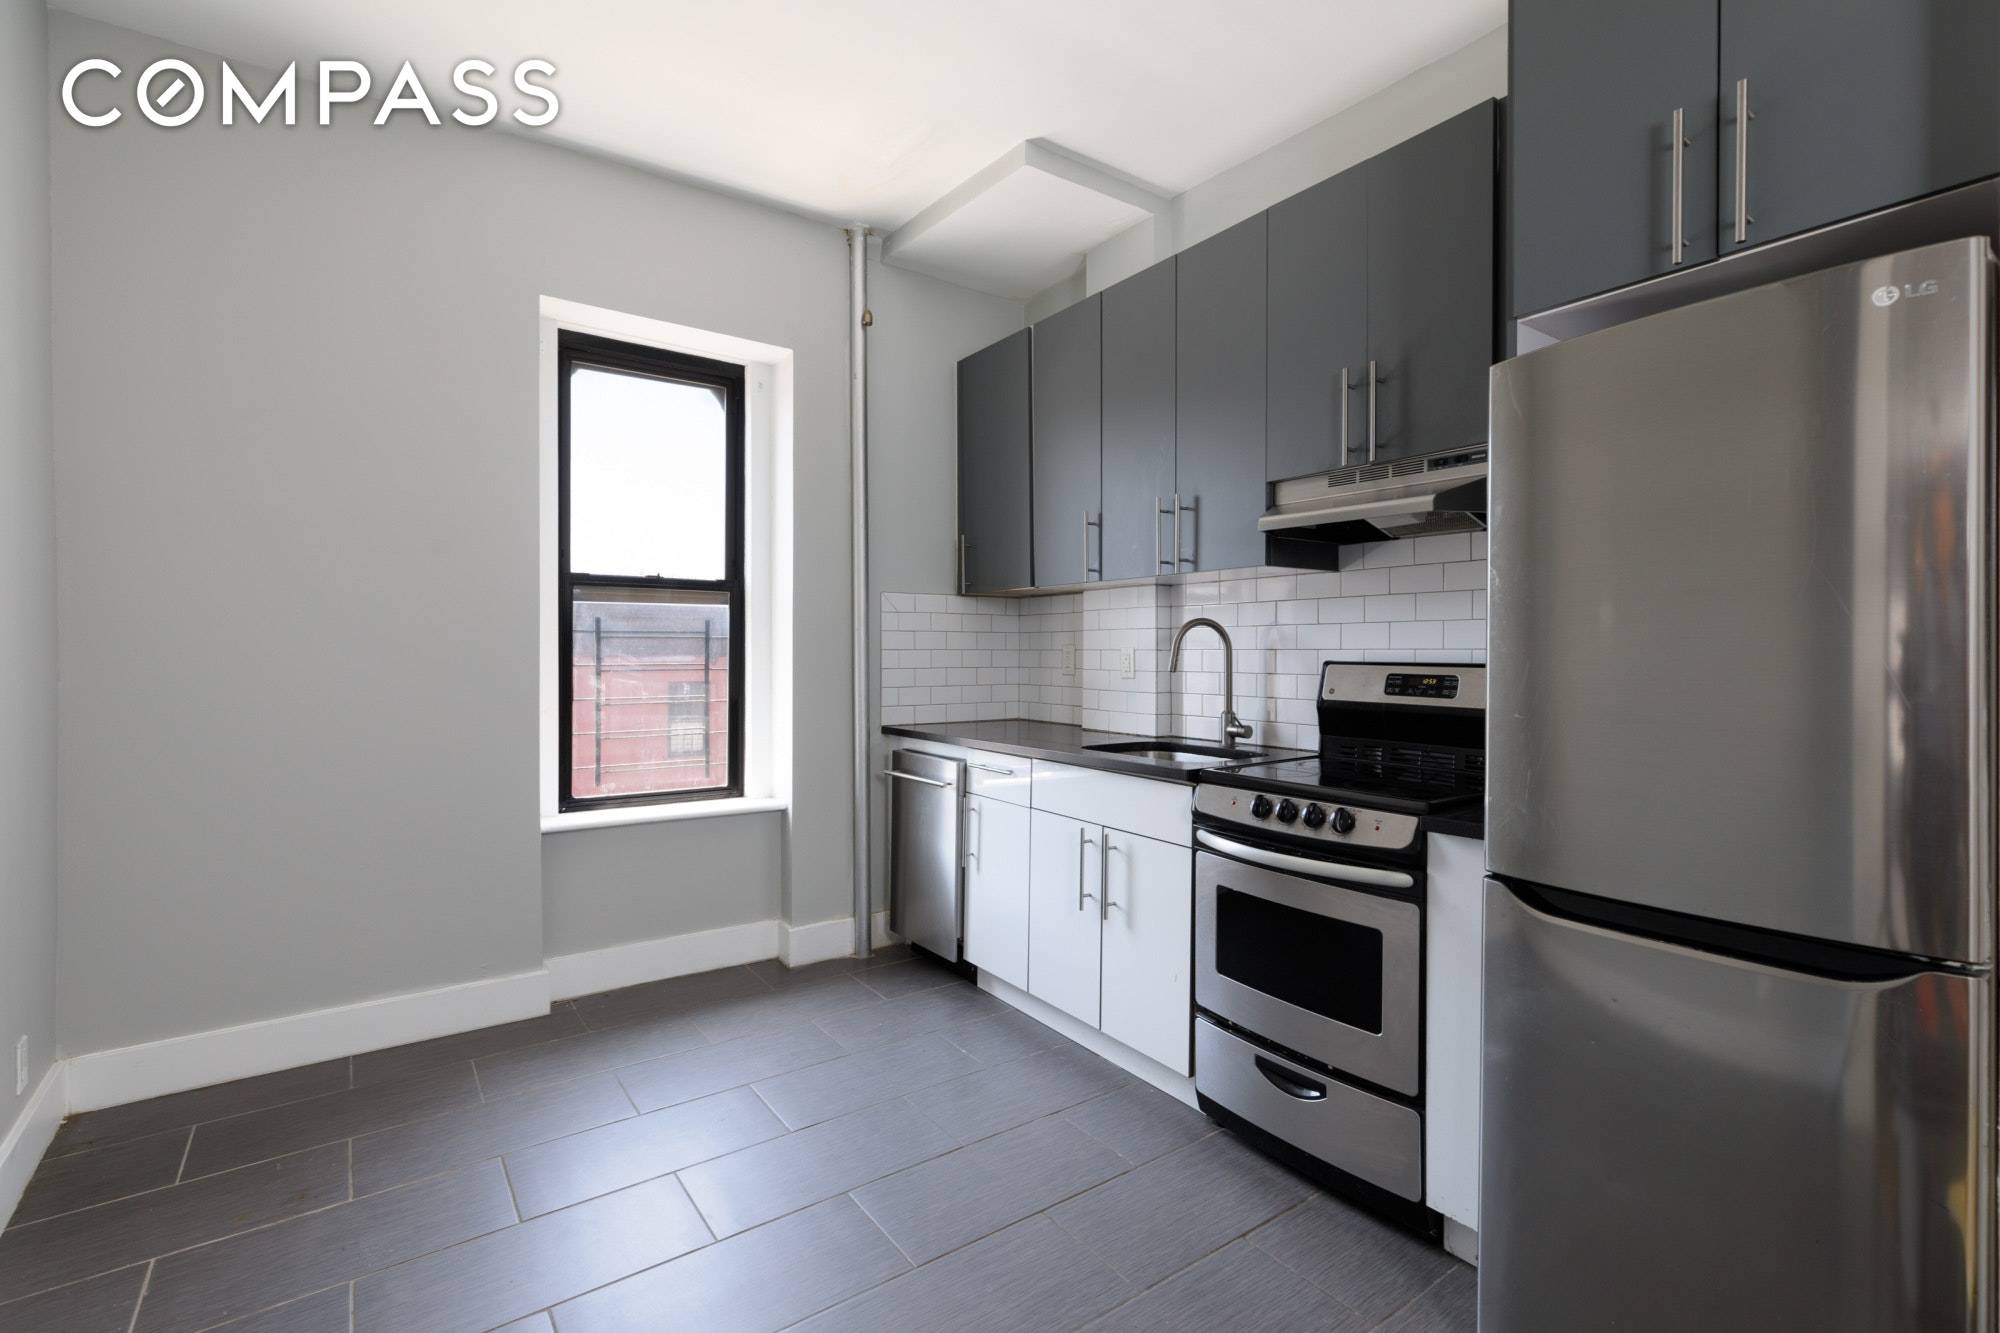 Located in the heart of Park Slope in a classic brownstone, this renovated true 3 bedroom is available for immediate occupancy.